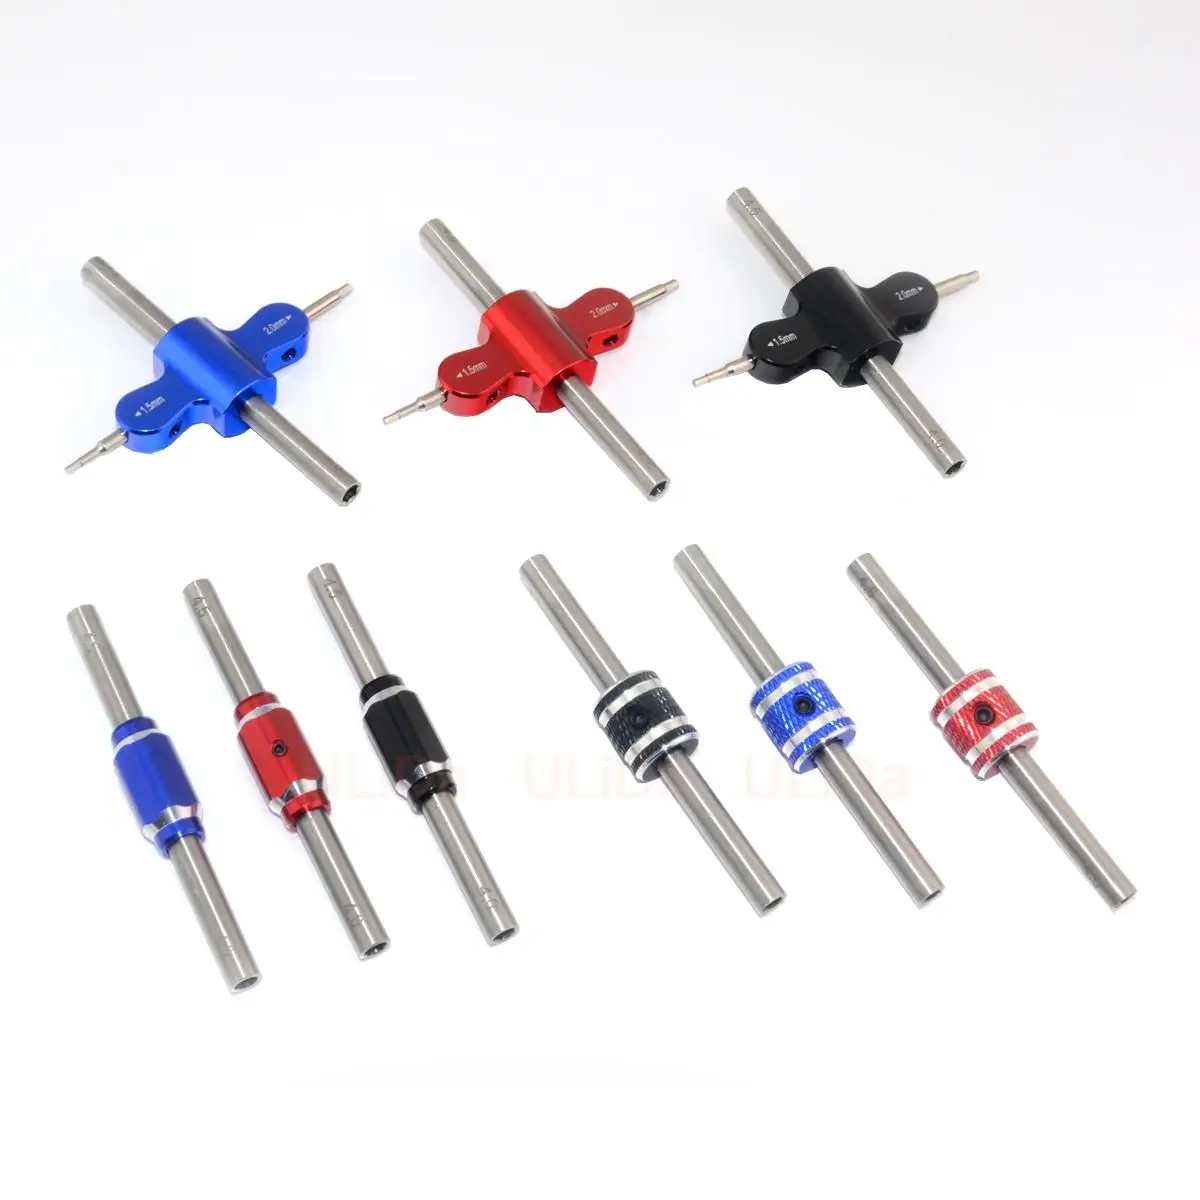 

Hex 4.5mm 4mm Wrench Socket 1.5mm 2.0mm Hexagon Screwdriver for Wltoys Tamiya RC Car FPV Quadcopter Drone UAV Boat